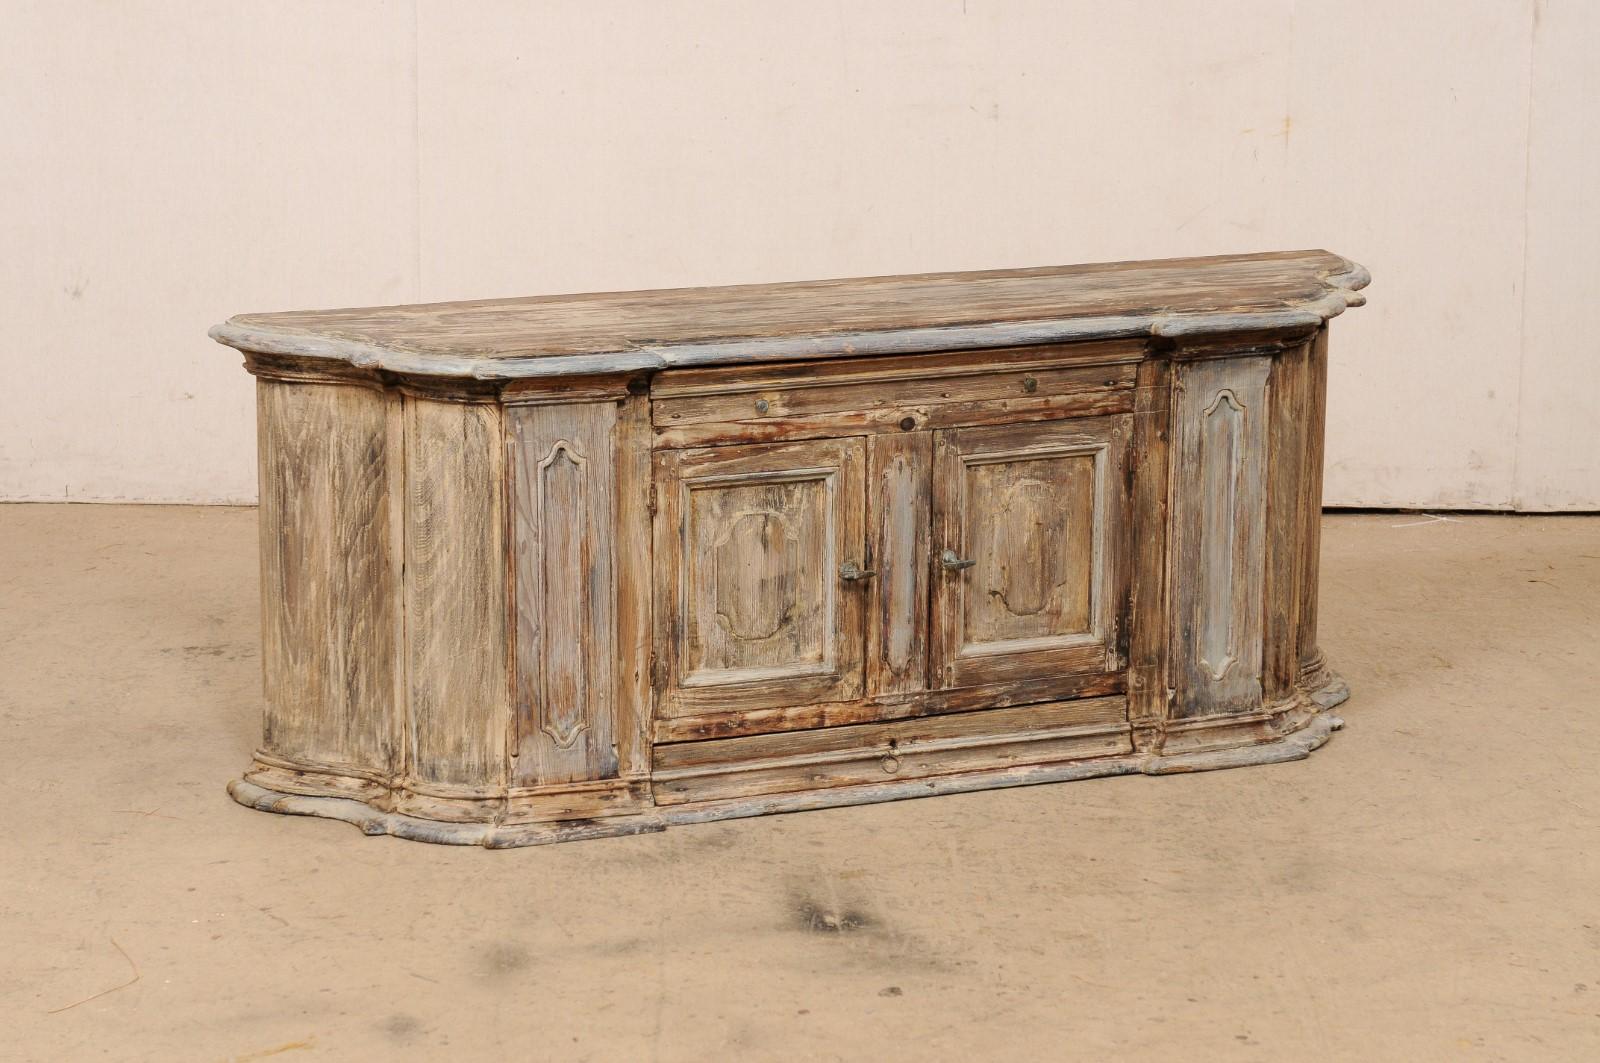 An Italian carved-wood bench with storage from the early 18th century. This antique bench from Italy has a flattened backside, with a curved/bowed (half-oval shape) front design with a double break-front step out flanking its center before rounding